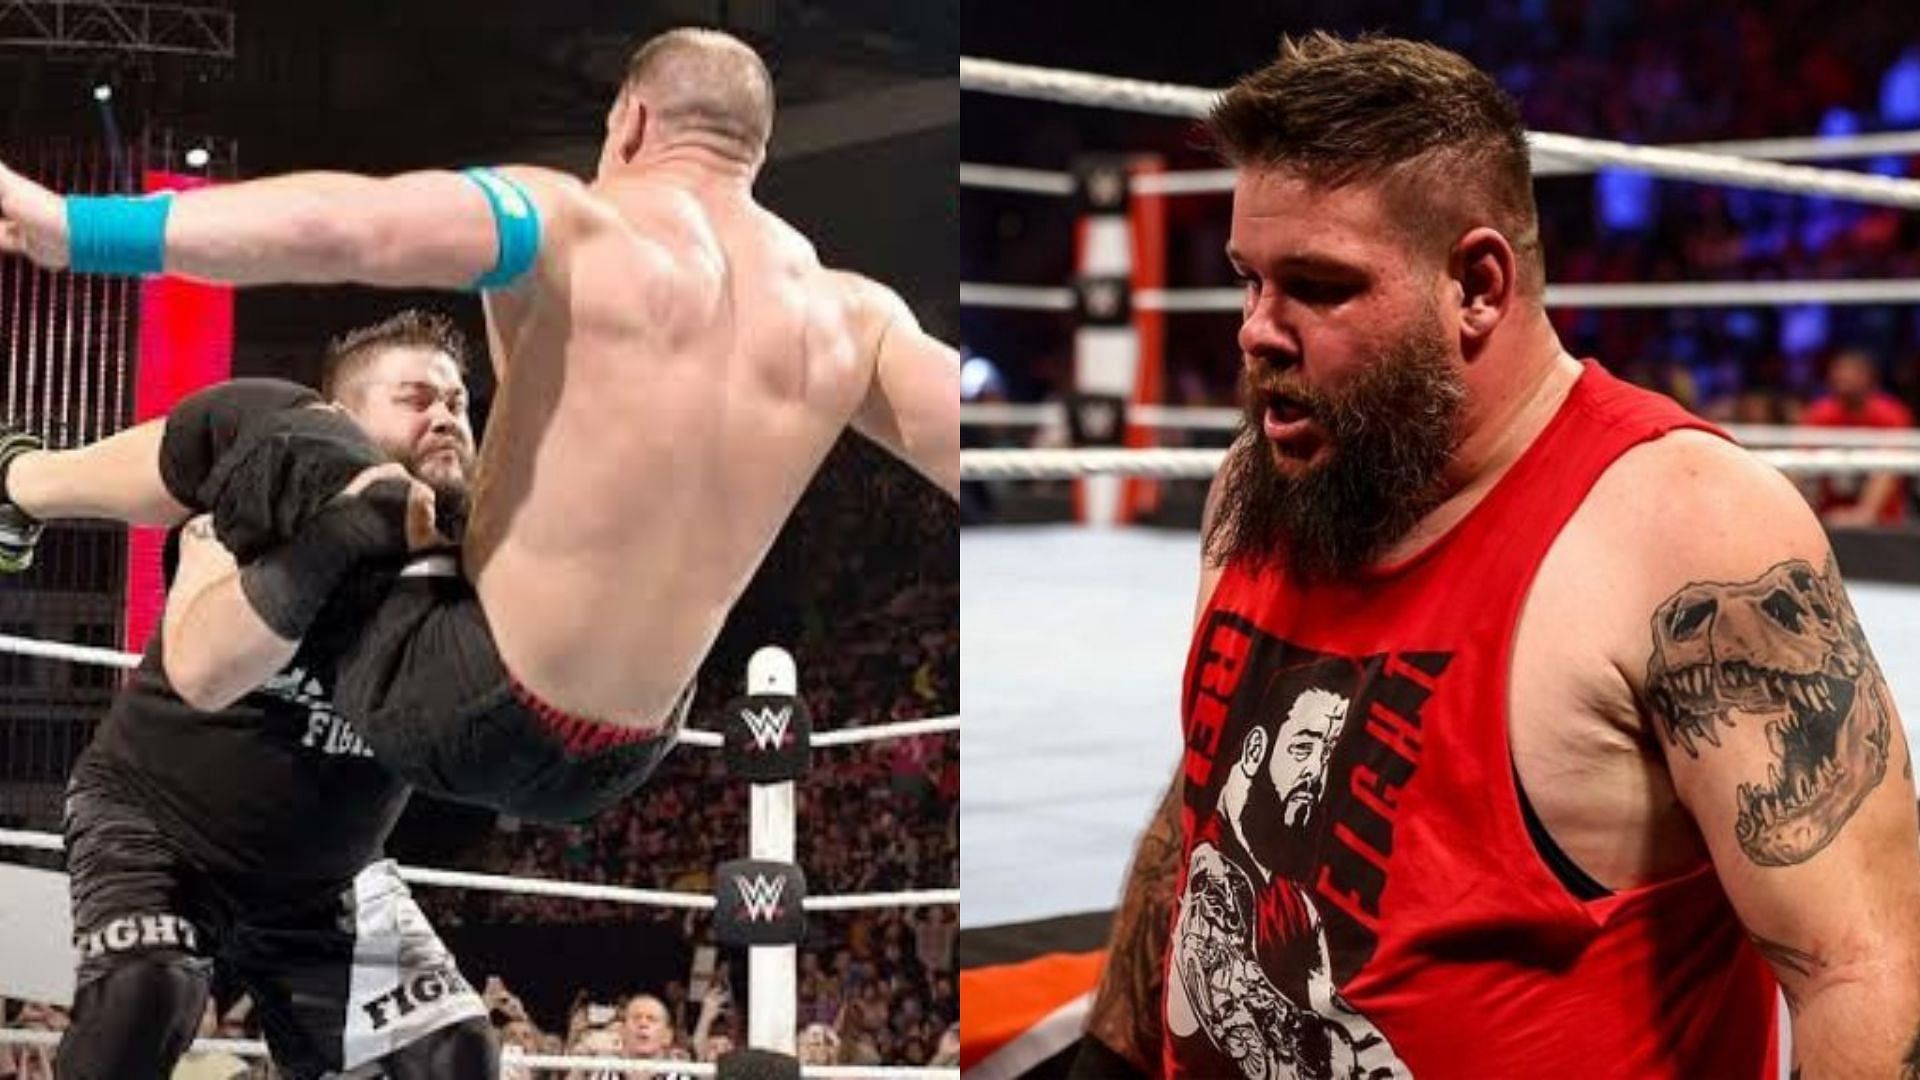 The Prizefighter is currently feuding against Ezekiel on RAW